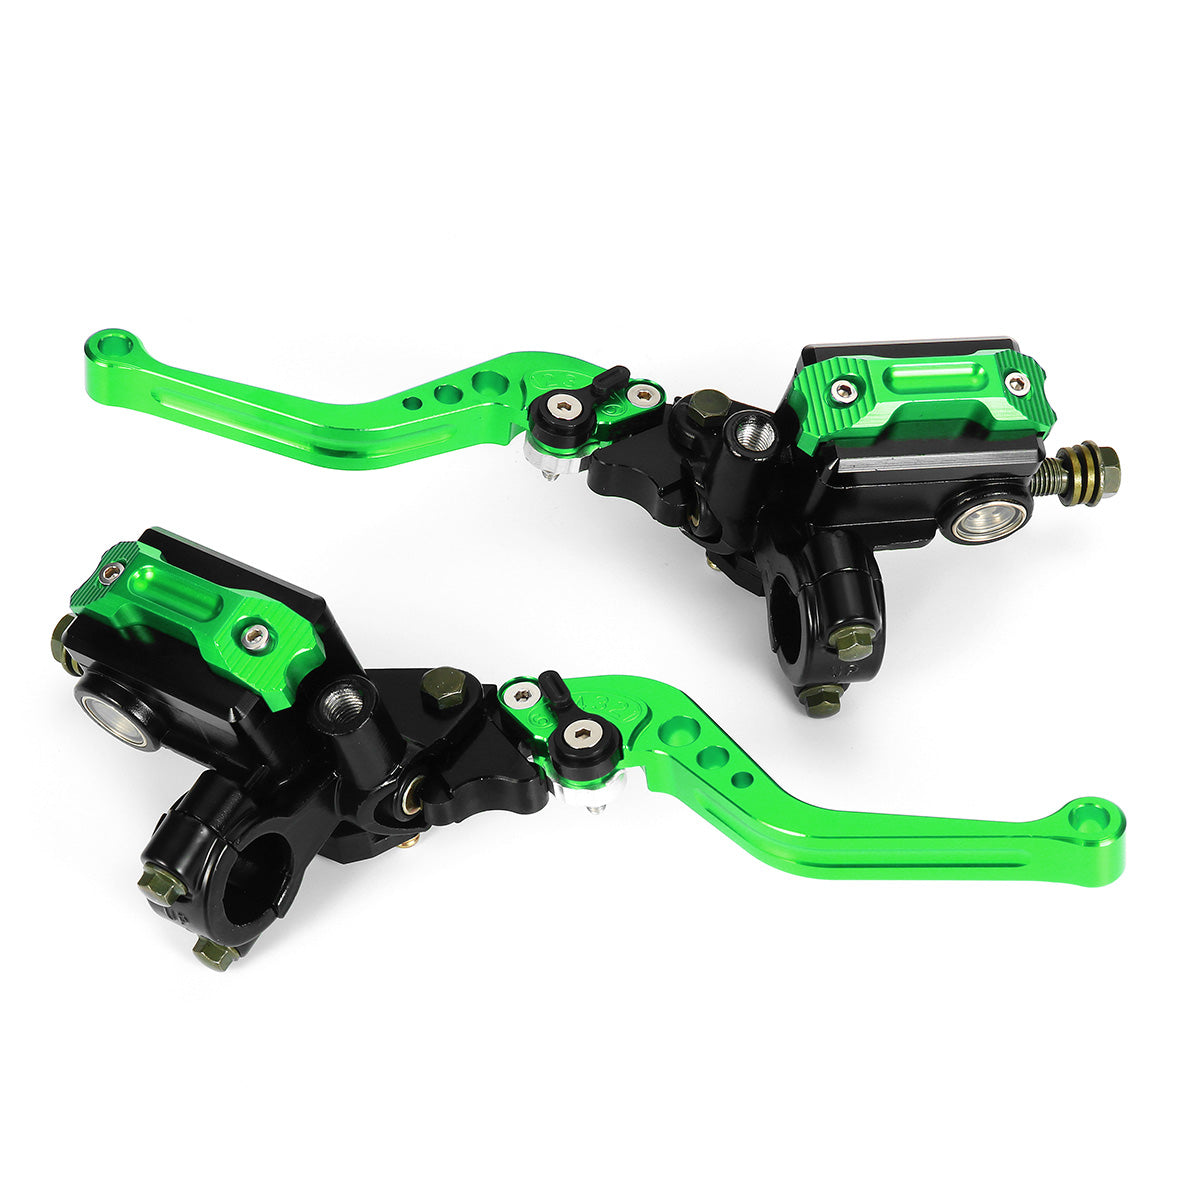 Lime Green Universal Motorcycle Hydraulic 7/8'' CNC Brake Clutch Master Cylinder Reservoir Lever Set